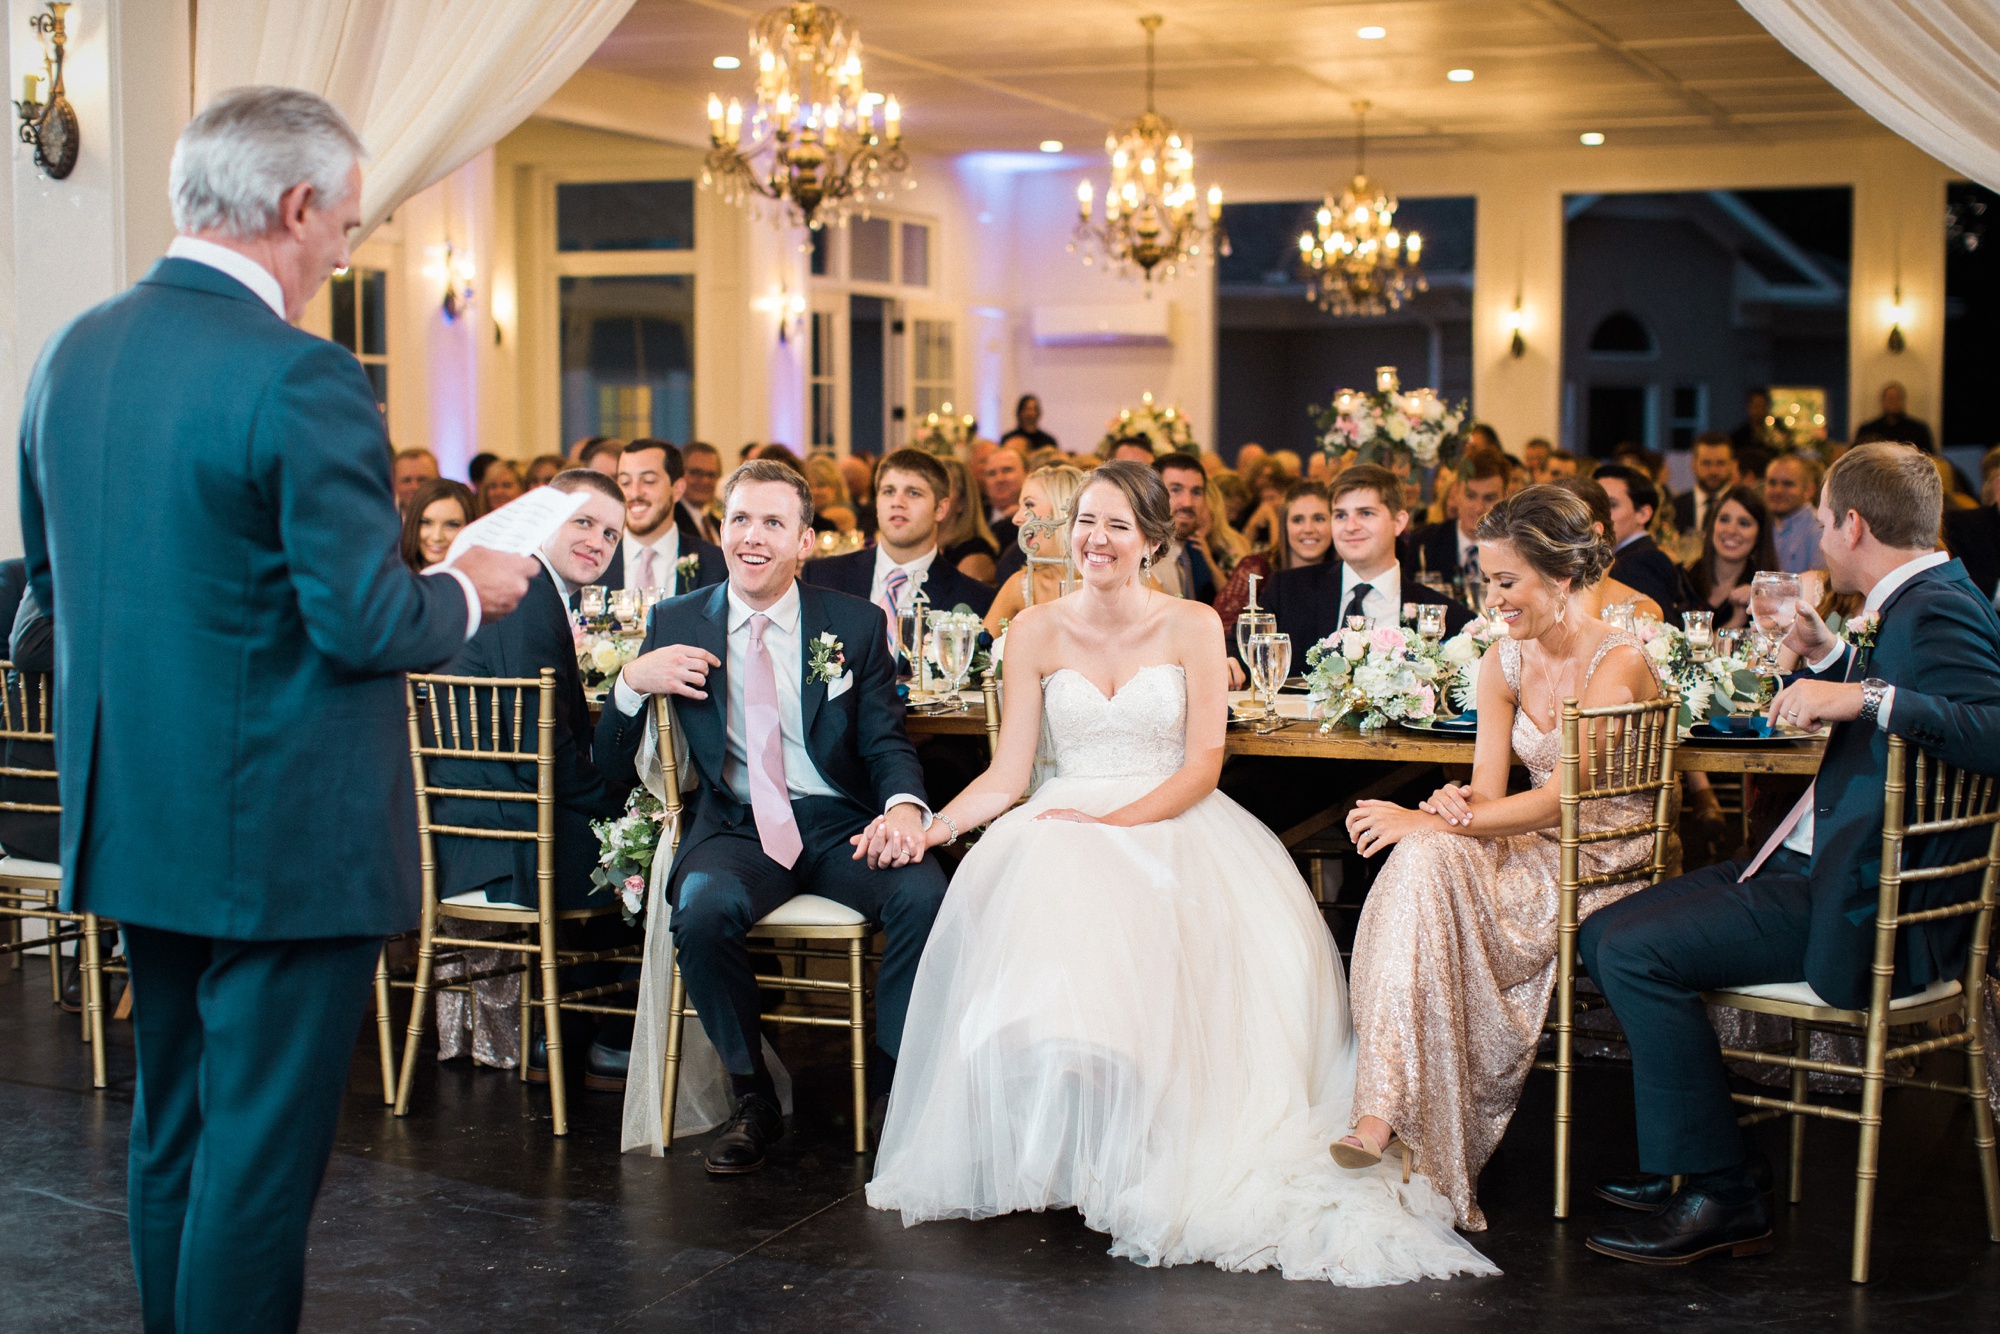 There's nothing like a speech from the father of the bride to lift everyone's spirits!